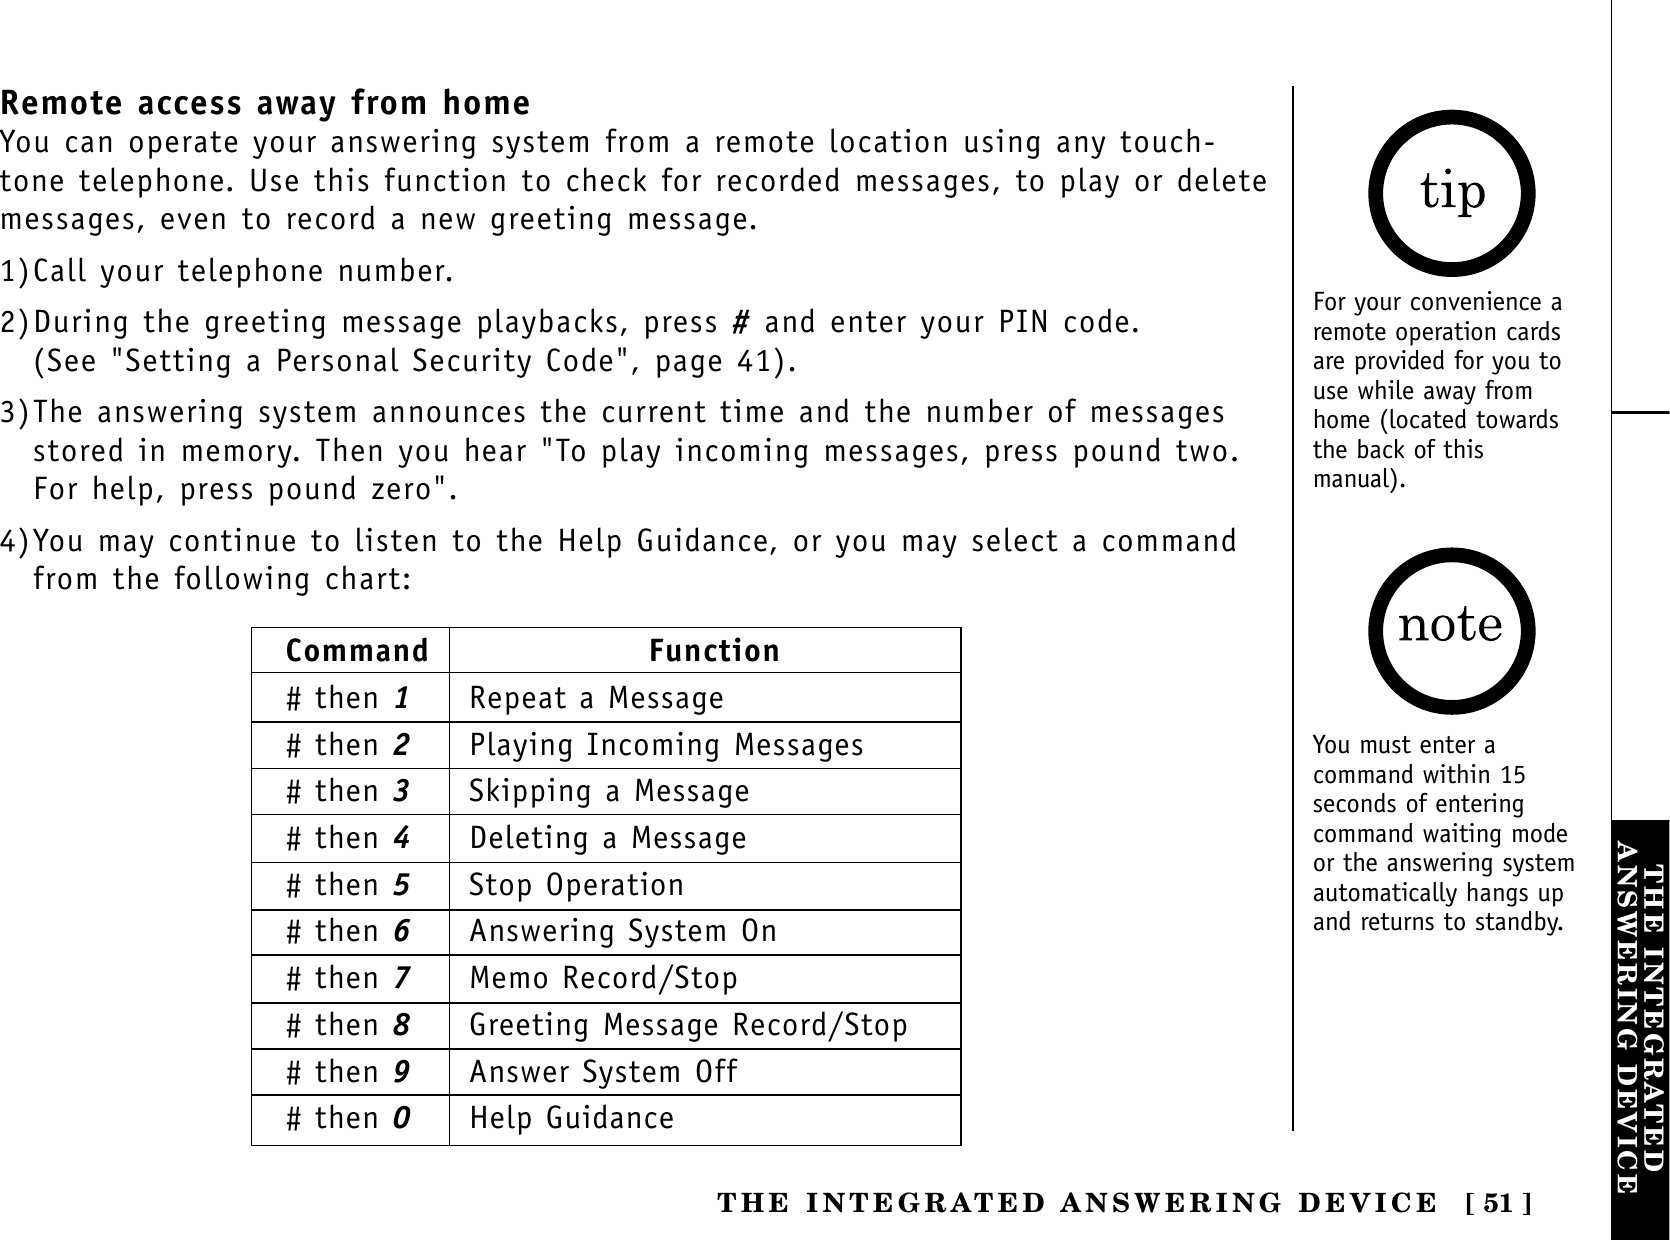 [ 51 ]THE INTEGRATEDANSWERING DEVICETHE INTEGRATED ANSWERING DEVICERemote access away from homeYou can operate your answering system from a remote location using any touch-tone telephone. Use this function to check for recorded messages, to play or deletemessages, even to record a new greeting message.1)Call your telephone number.2)During the greeting message playbacks, press #and enter your PIN code. (See &quot;Setting a Personal Security Code&quot;, page 41).3)The answering system announces the current time and the number of messagesstored in memory. Then you hear &quot;To play incoming messages, press pound two.For help, press pound zero&quot;.4)You may continue to listen to the Help Guidance, or you may select a commandfrom the following chart:For your convenience aremote operation cardsare provided for you touse while away fromhome (located towardsthe back of thismanual).Command Function# then 1Repeat a Message# then 2Playing Incoming Messages# then 3Skipping a Message# then 4Deleting a Message# then 5Stop Operation# then 6Answering System On# then 7Memo Record/Stop# then 8Greeting Message Record/Stop# then 9Answer System Off# then 0Help GuidanceYou must enter acommand within 15seconds of enteringcommand waiting modeor the answering systemautomatically hangs upand returns to standby.